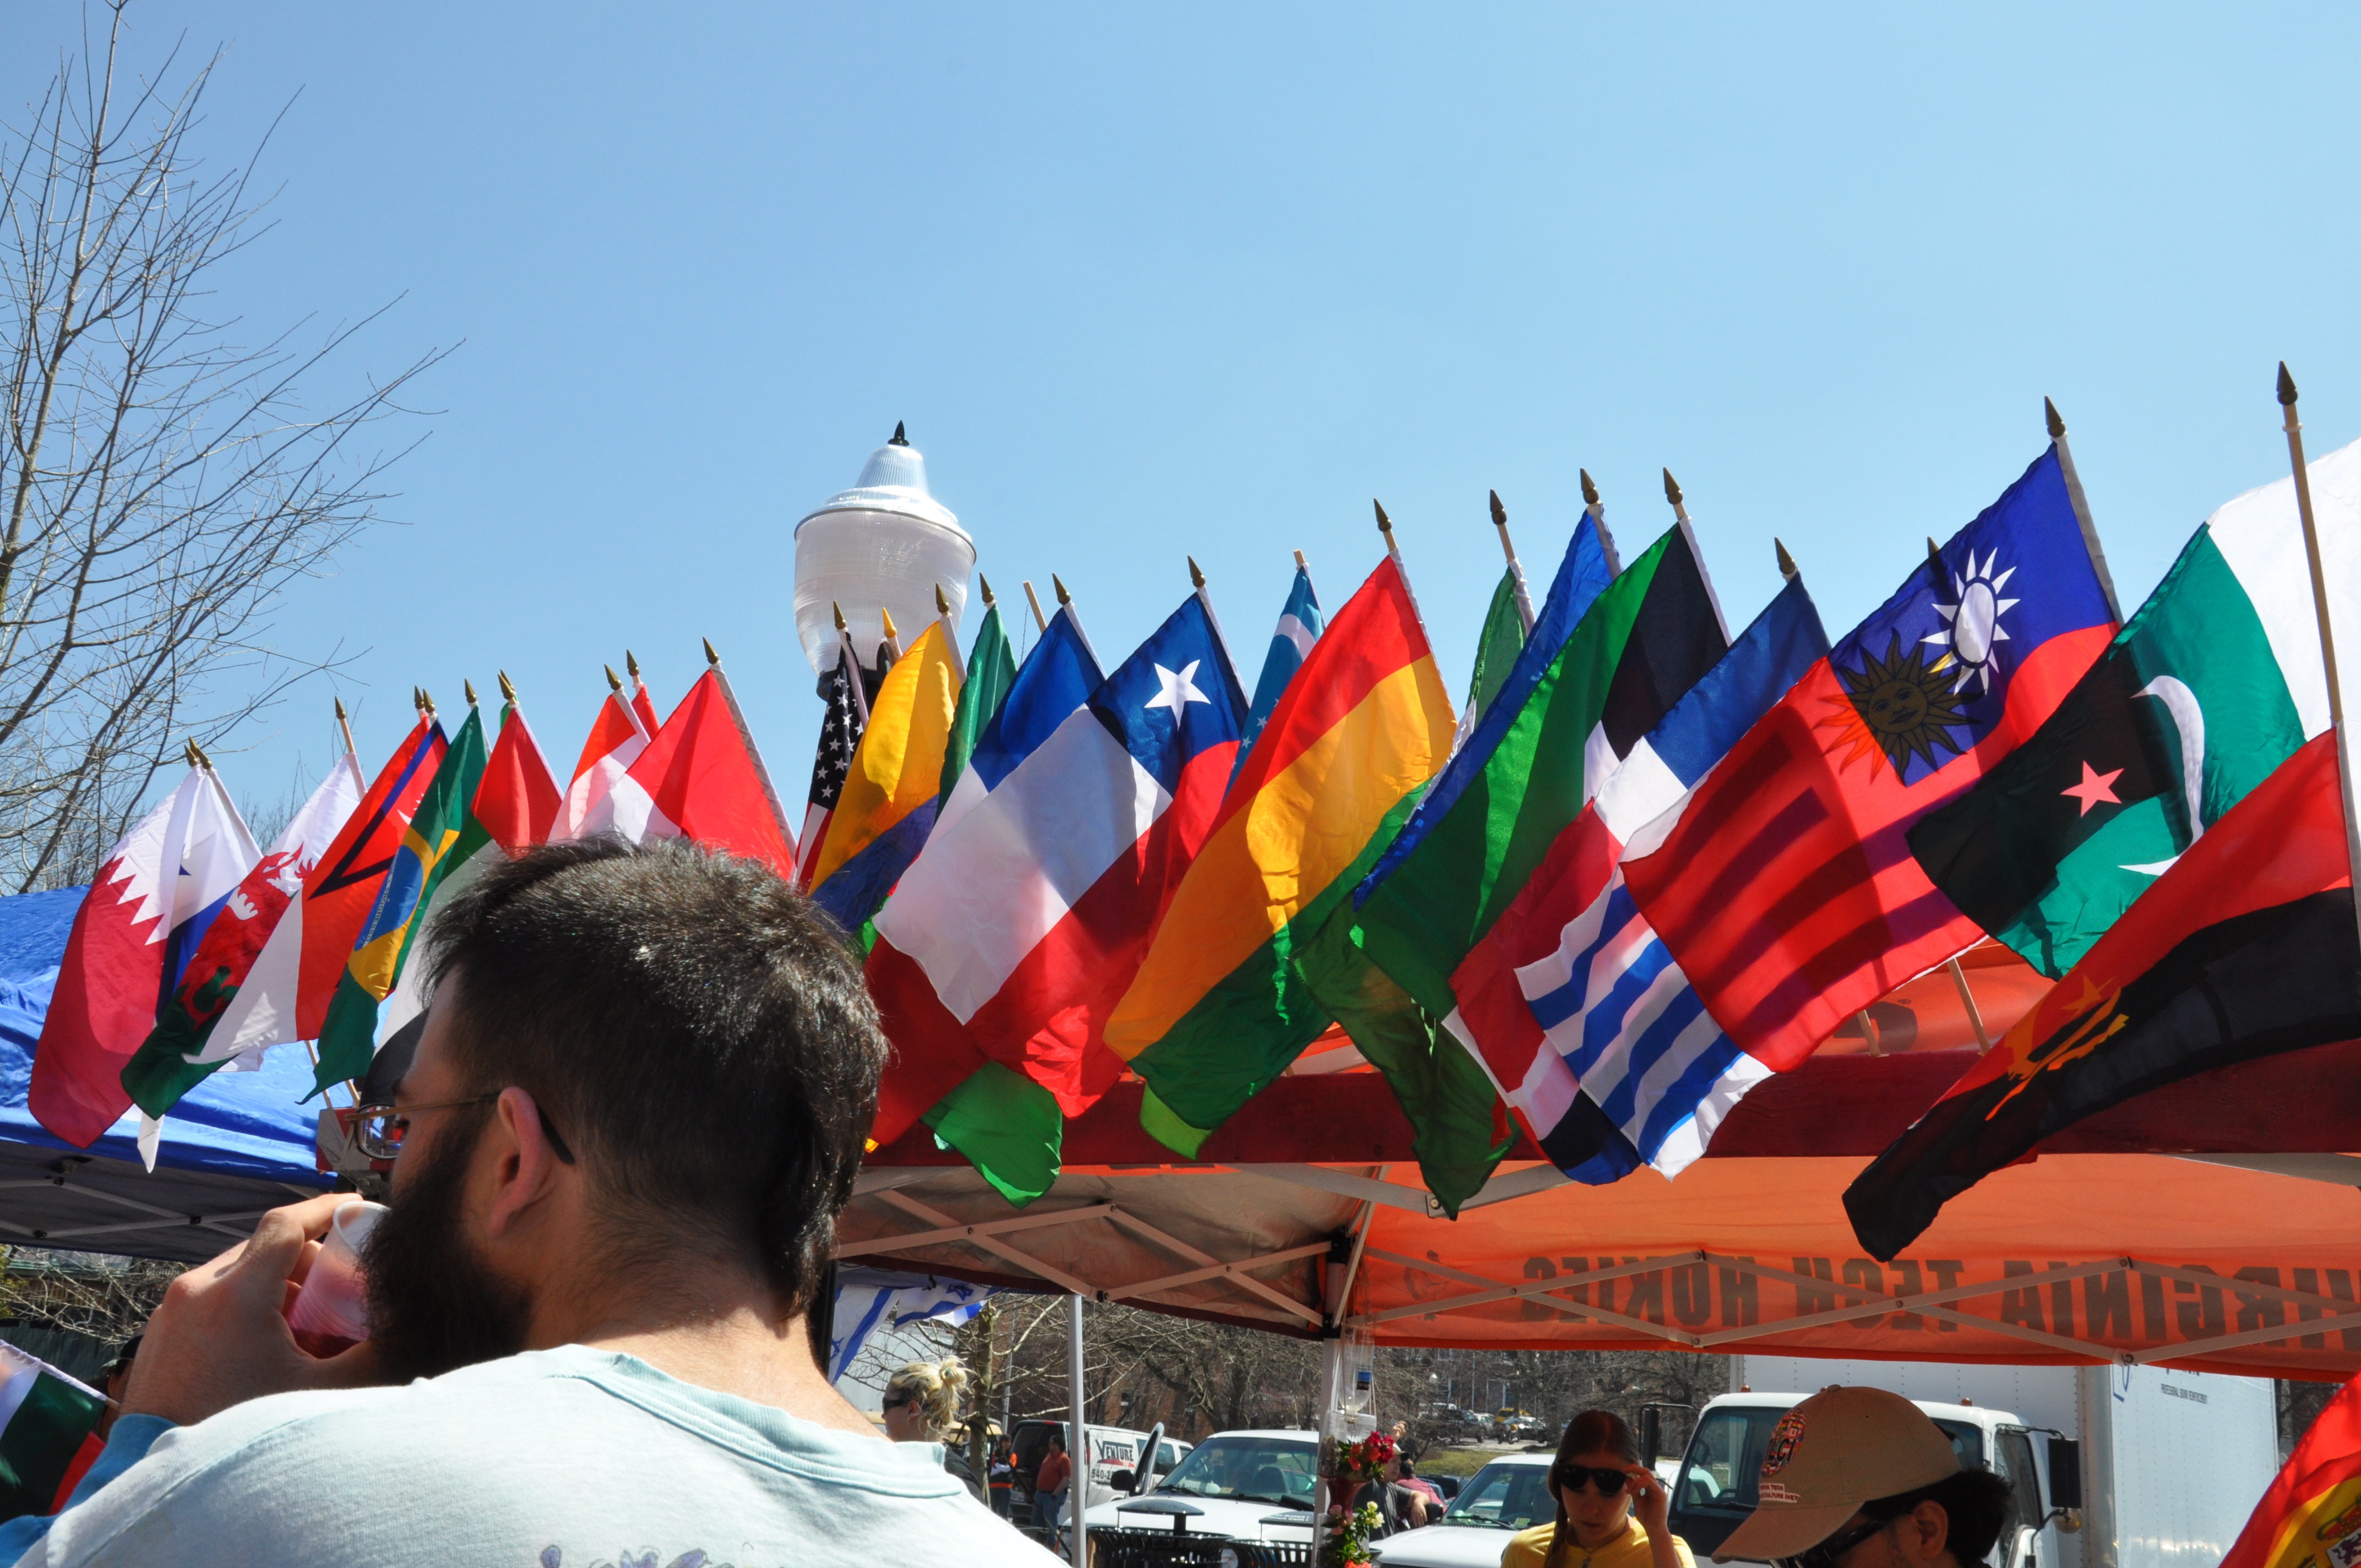 Flags of many nations displayed at the International Street Fair